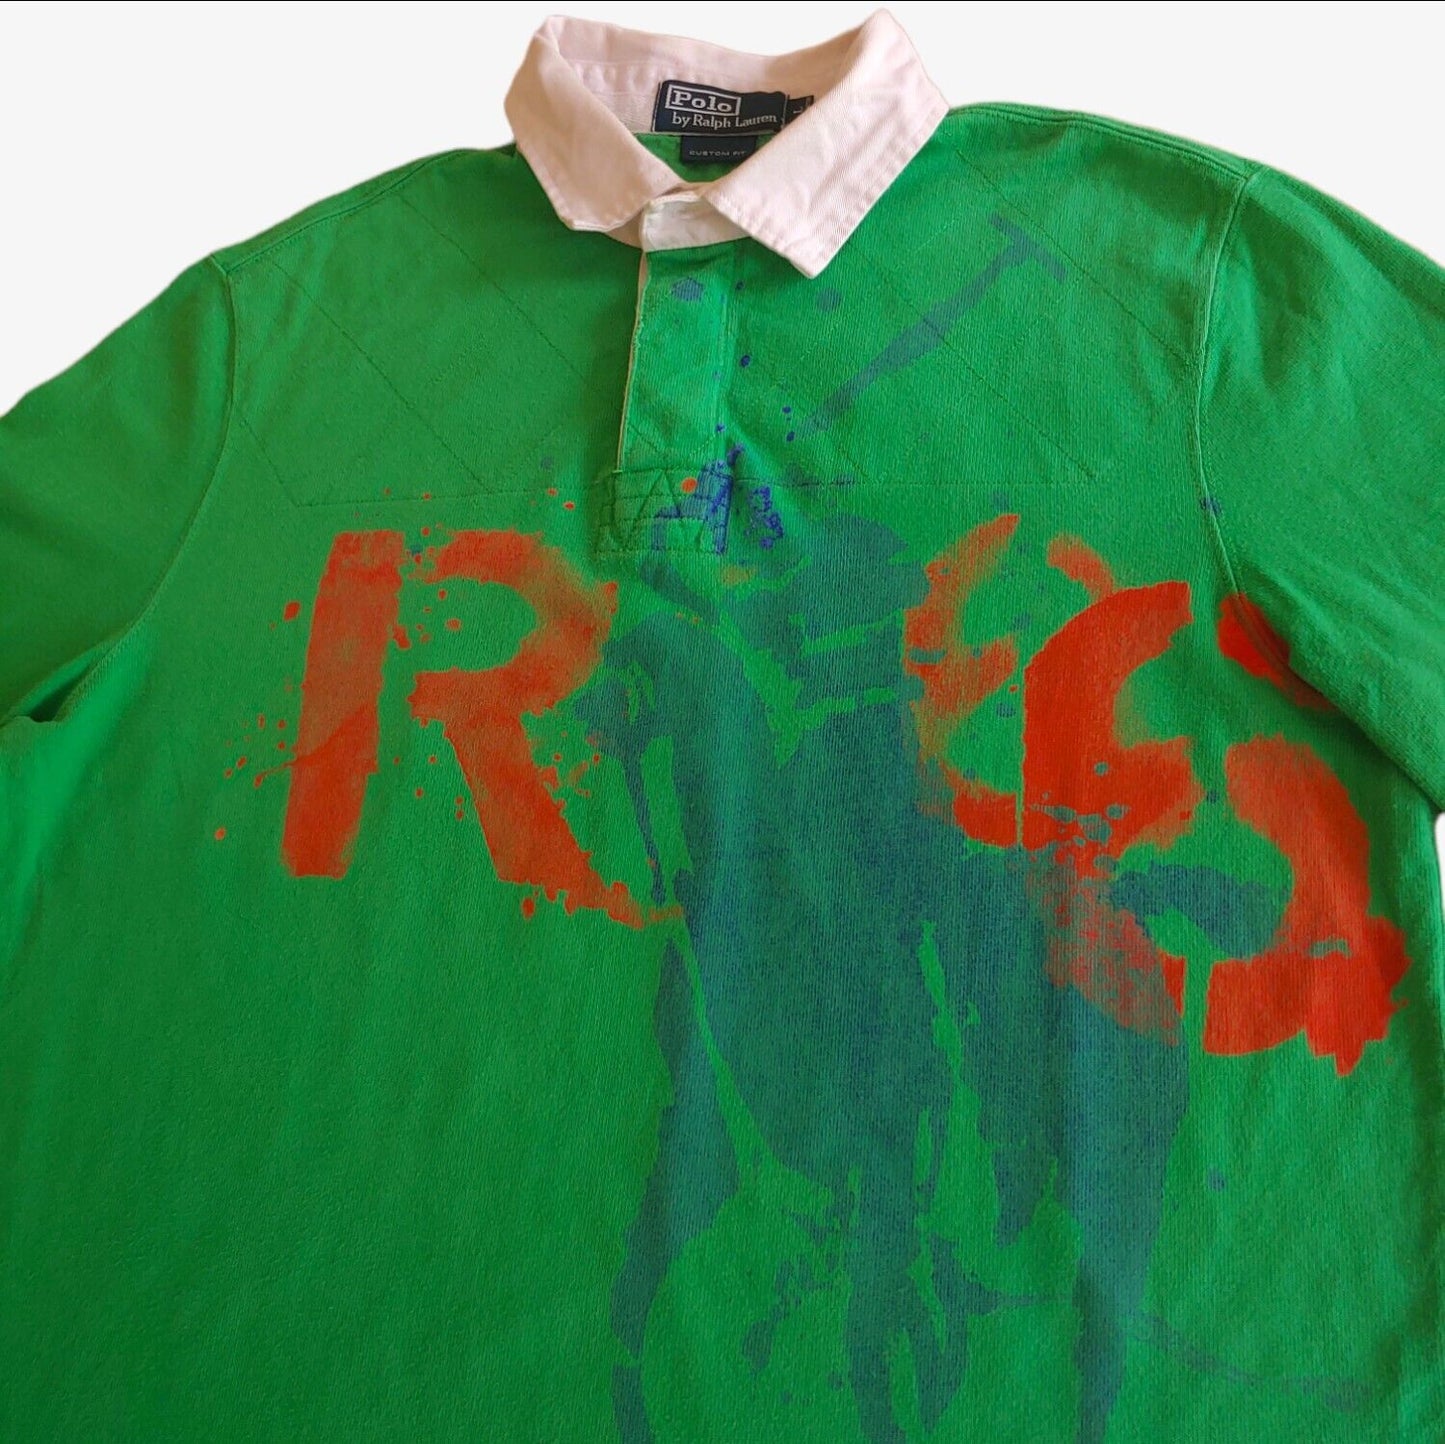 Vintage 90s Polo Ralph Lauren Green Long Sleeve Rugby Shirt With Big Spell Out Polo Player Logo Graphic Print Front - Casspios Dream